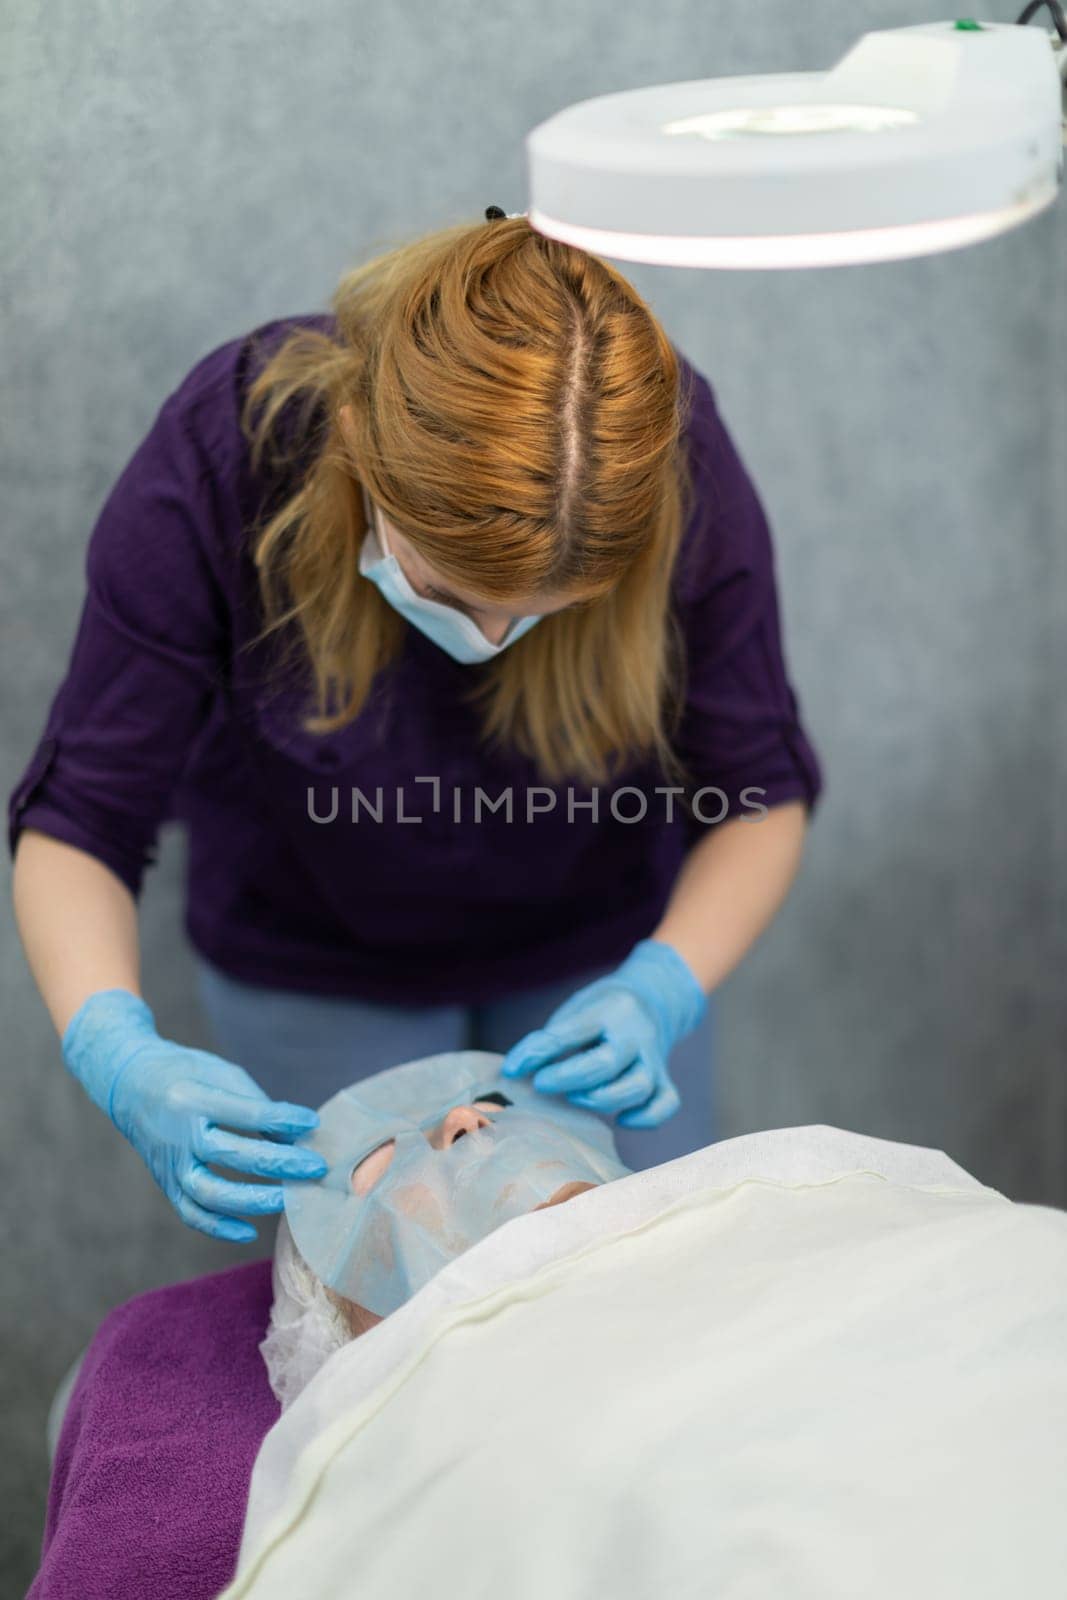 A person making a visit to a beauty salon is lying on a bed. She is covered with a white sheet. The beautician applies a moisturizing mask to the client's face.